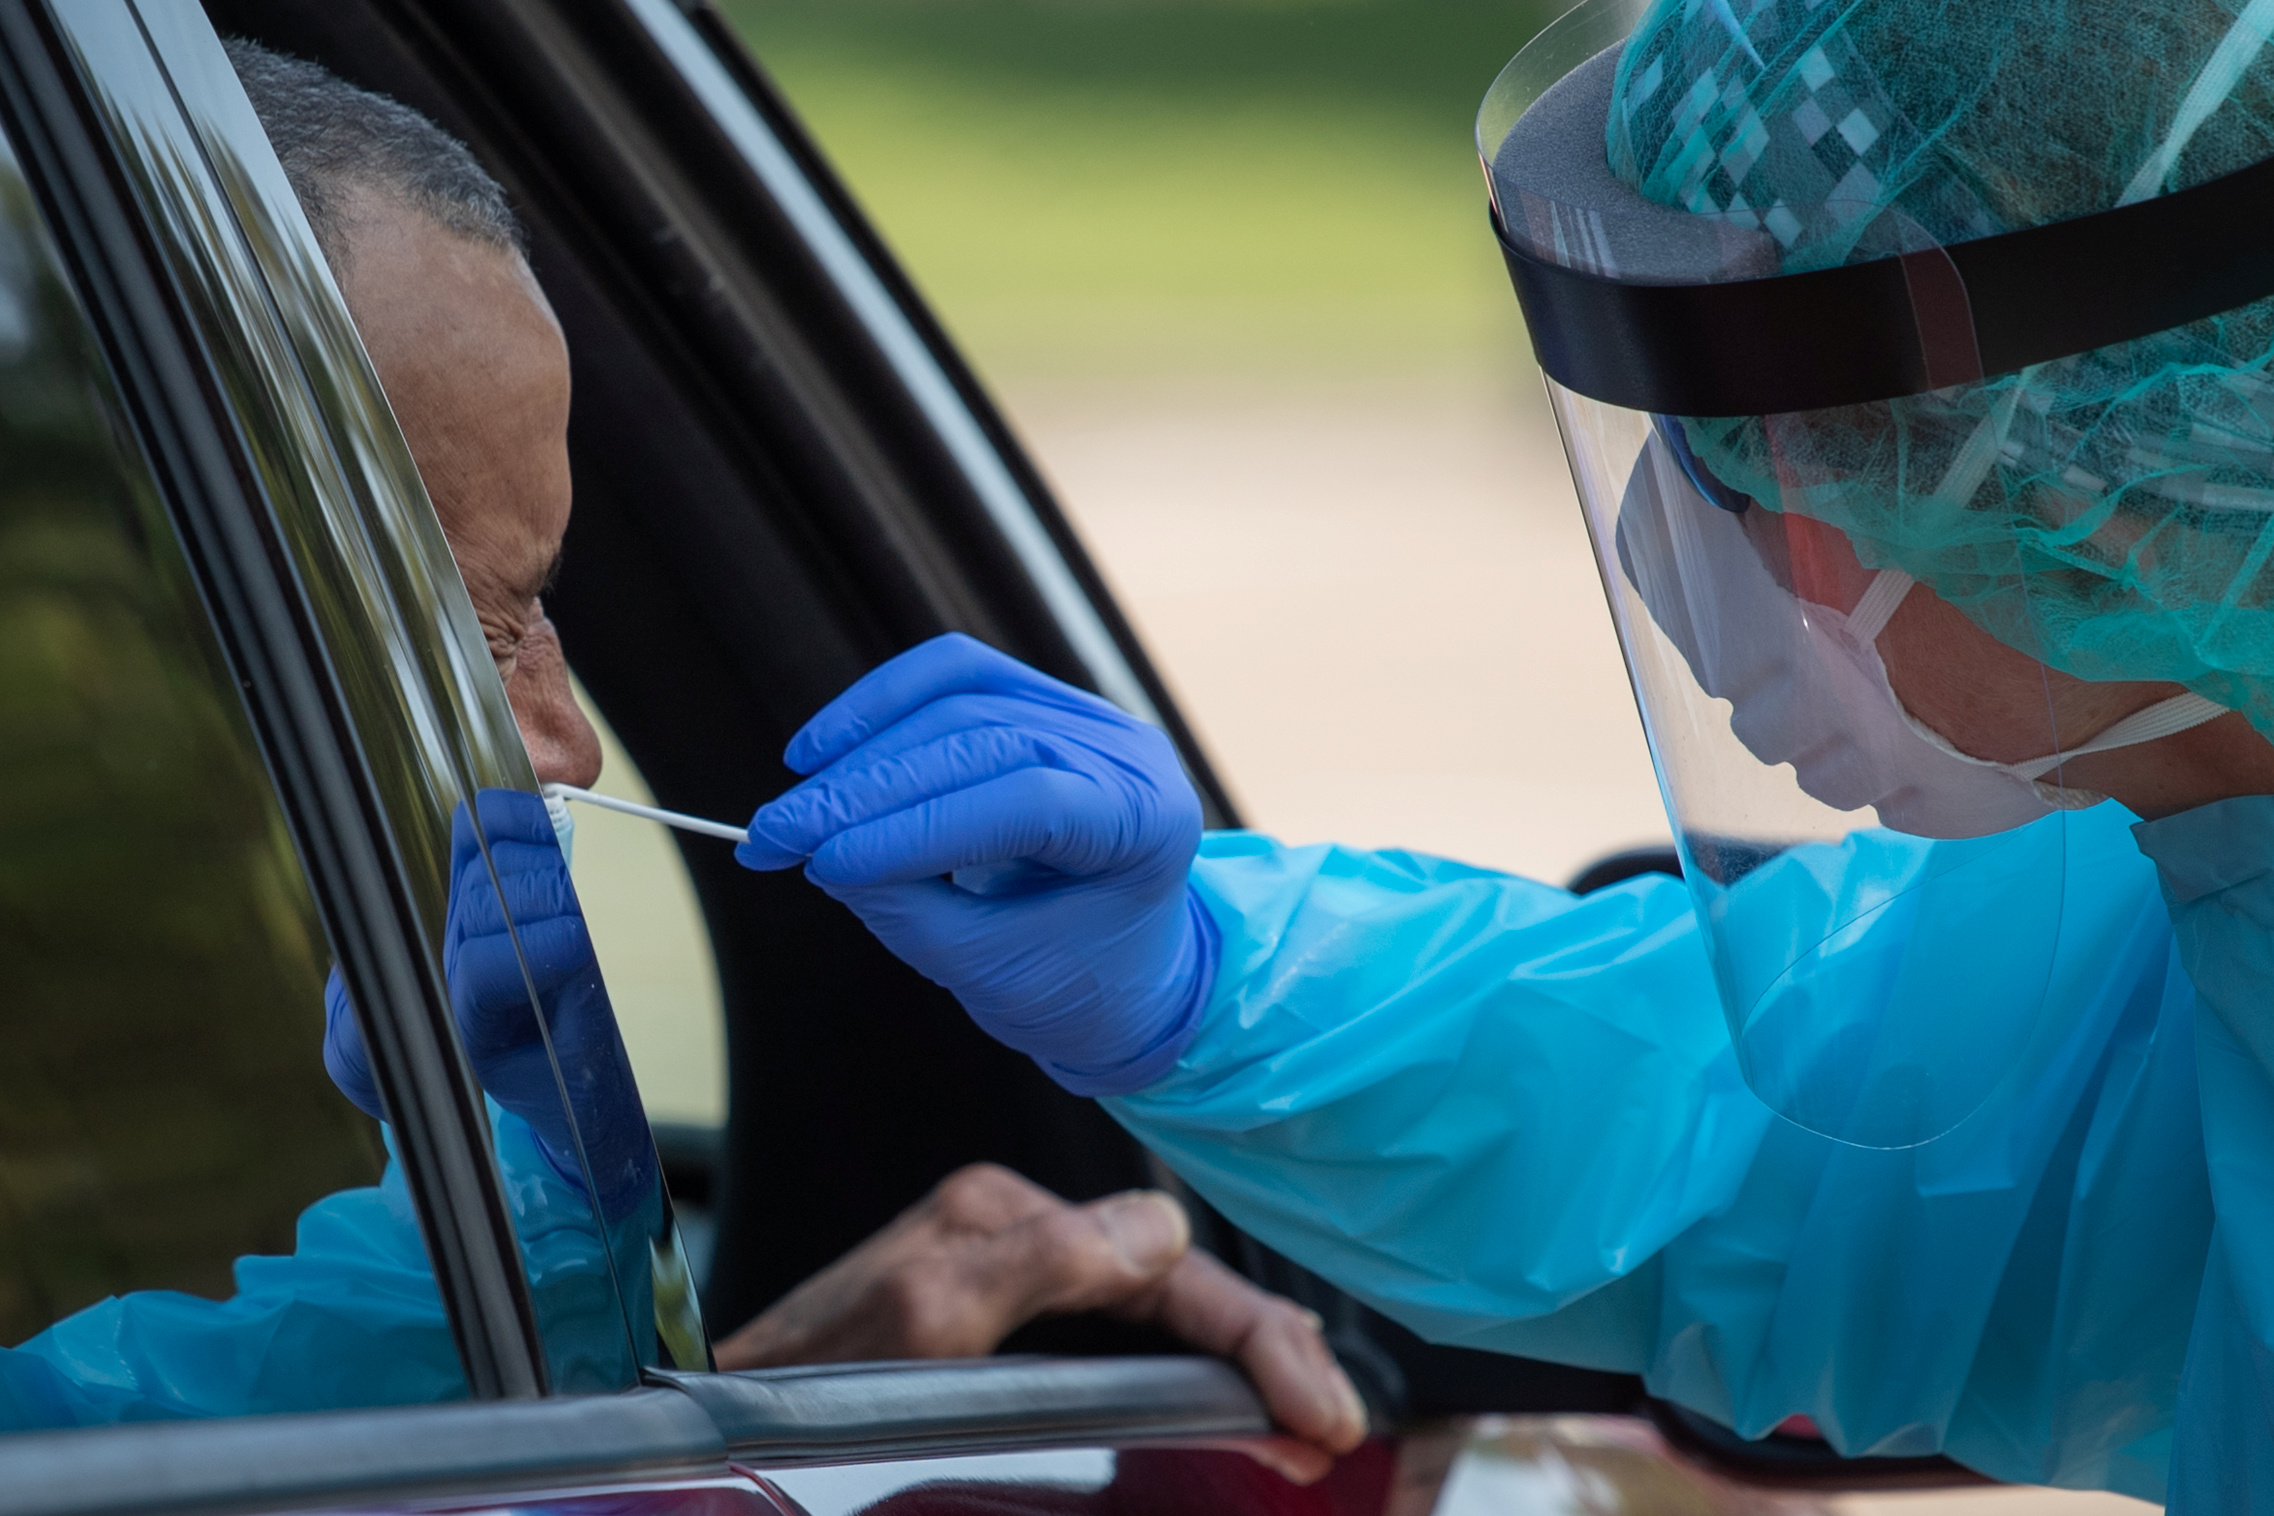 PHOTO: A health care worker uses a swab to test a man for COVID-19 at a drive-in testing location in Houston, Texas, on Aug. 18, 2020.